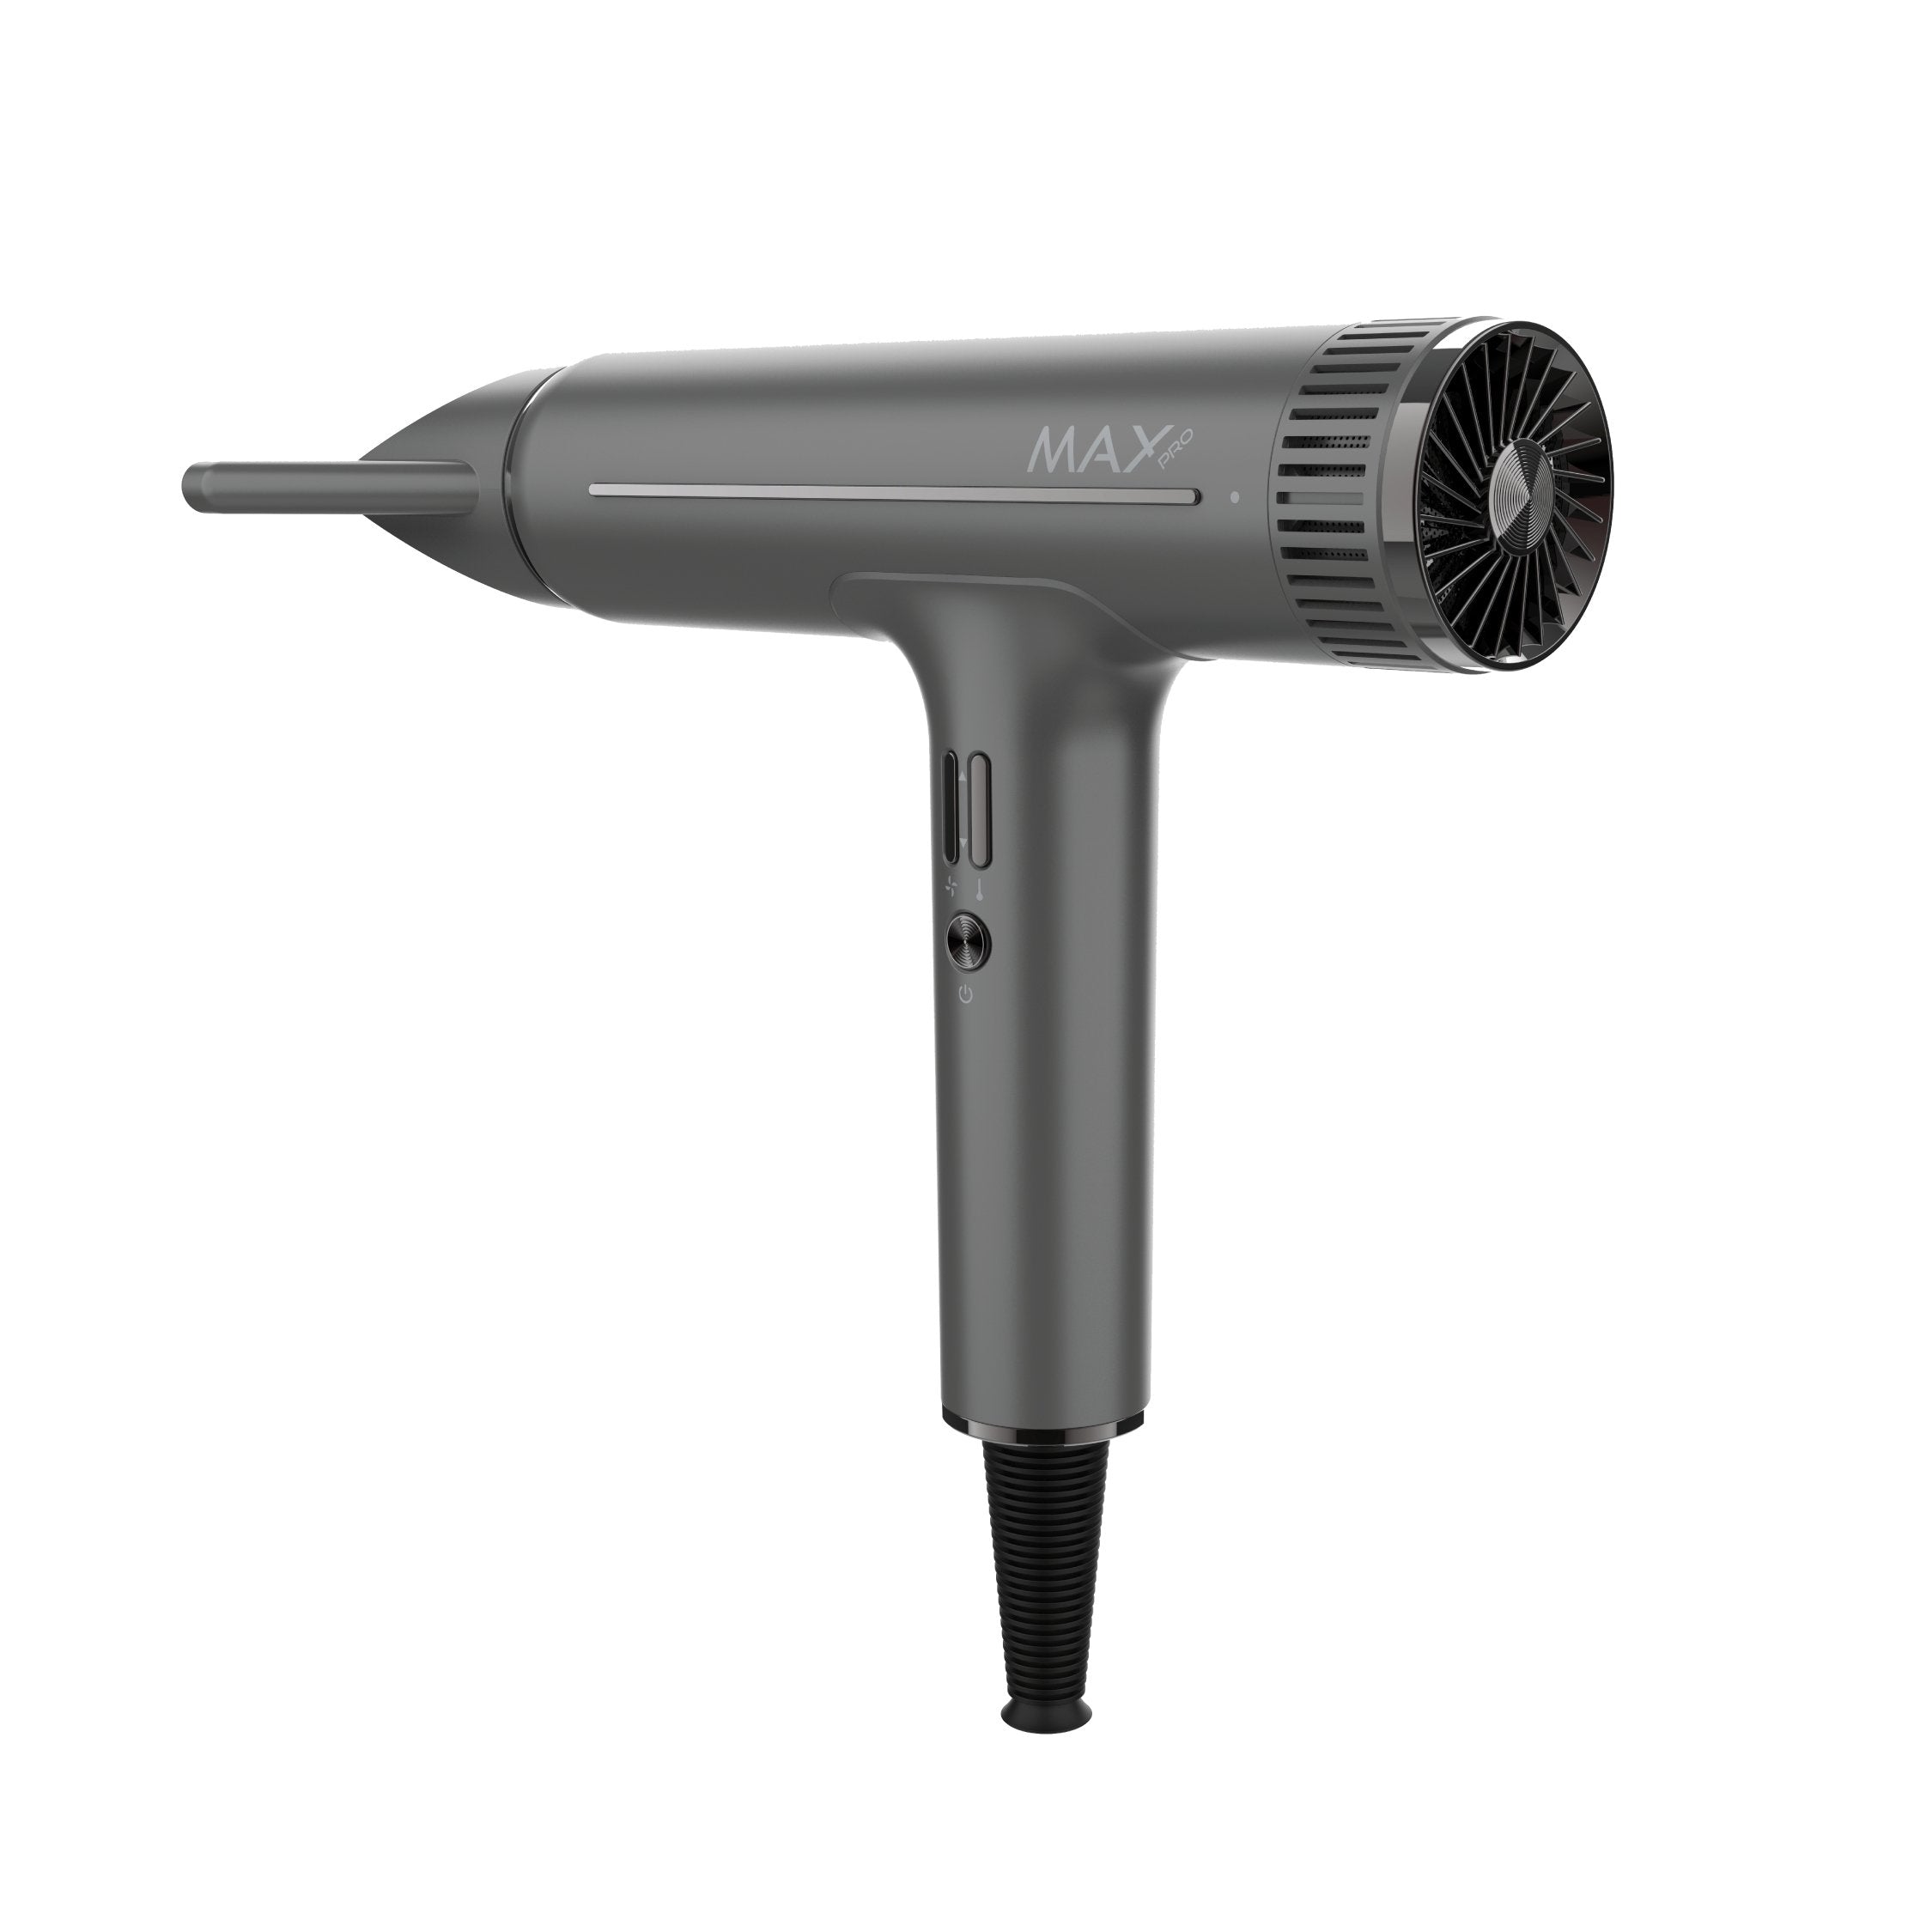 Max Pro Infinity Hairdryer 2100W - Max Pro x MOHI